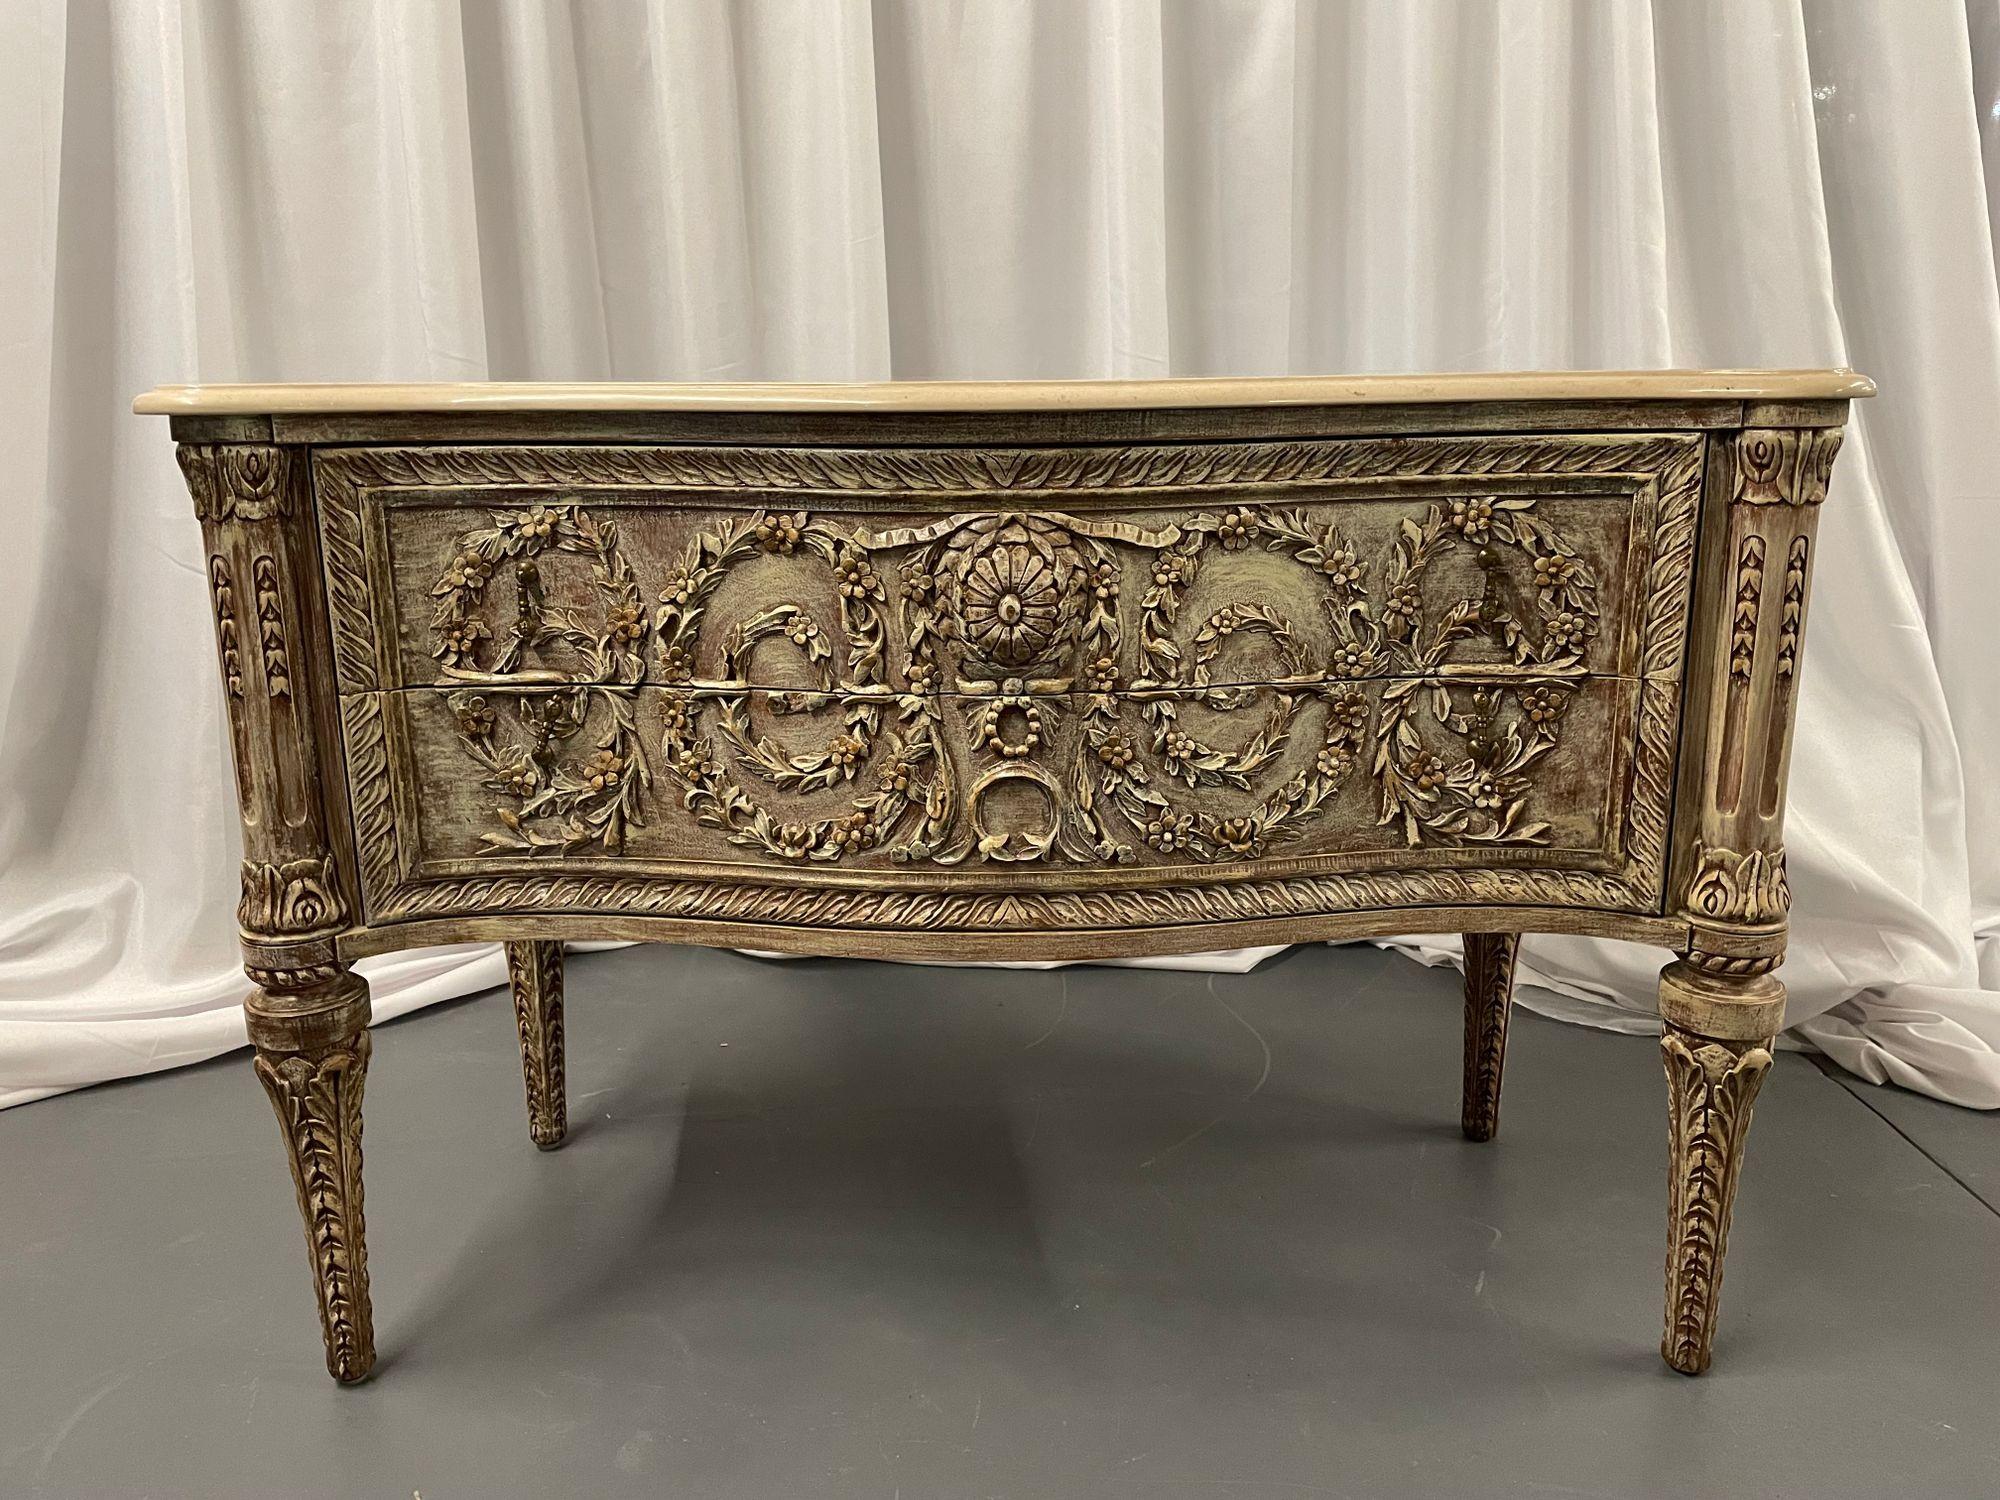 A Rococo Style Commode, Chest, Dresser with a Marble Top, Carved In Good Condition For Sale In Stamford, CT